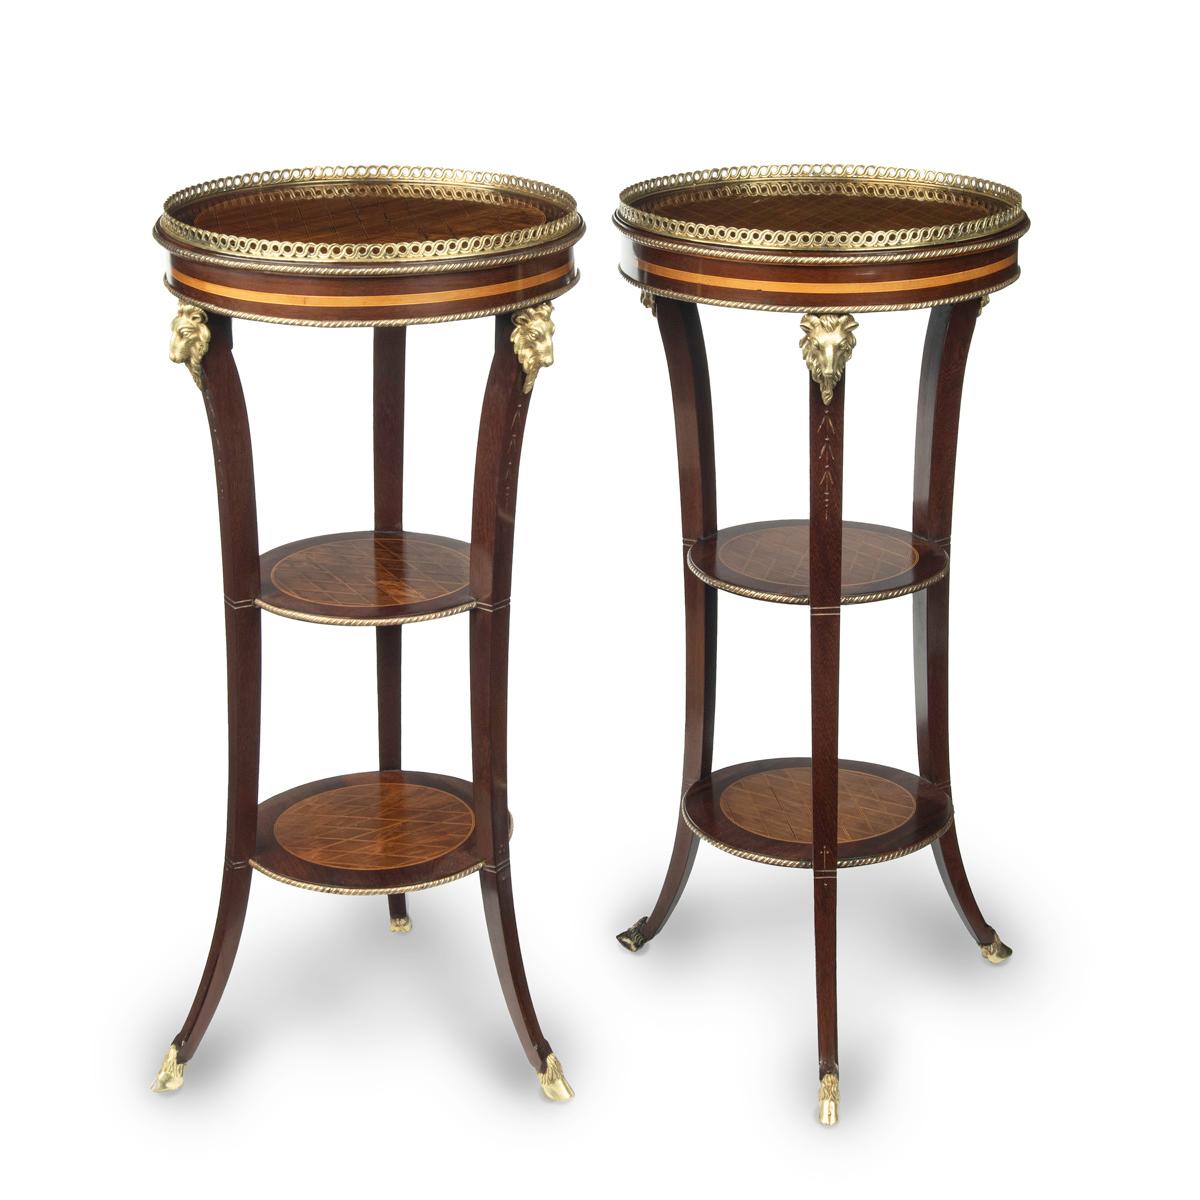 A pair of late 19th century French 3 tier satinwood side tables, each with a circular top with an ormolu gallery, all three tiers decorated with a boxwood diamond trellis on a satinwood ground, purpleheart banding, raised on outswept feet with